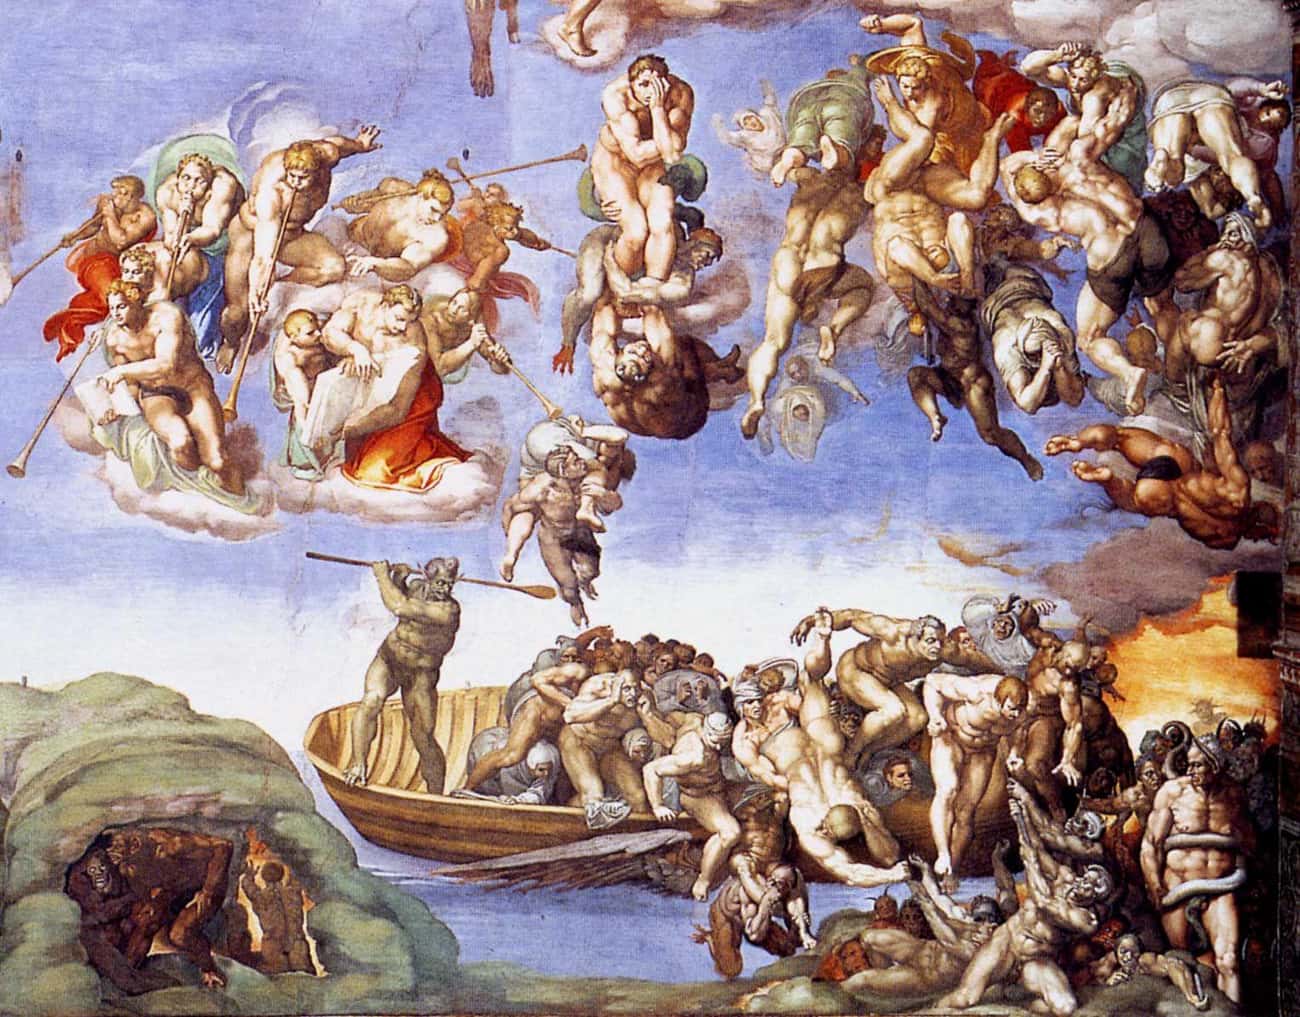 Michelangelo's Hell In 'The Last Judgment' Proved To Be Controversial